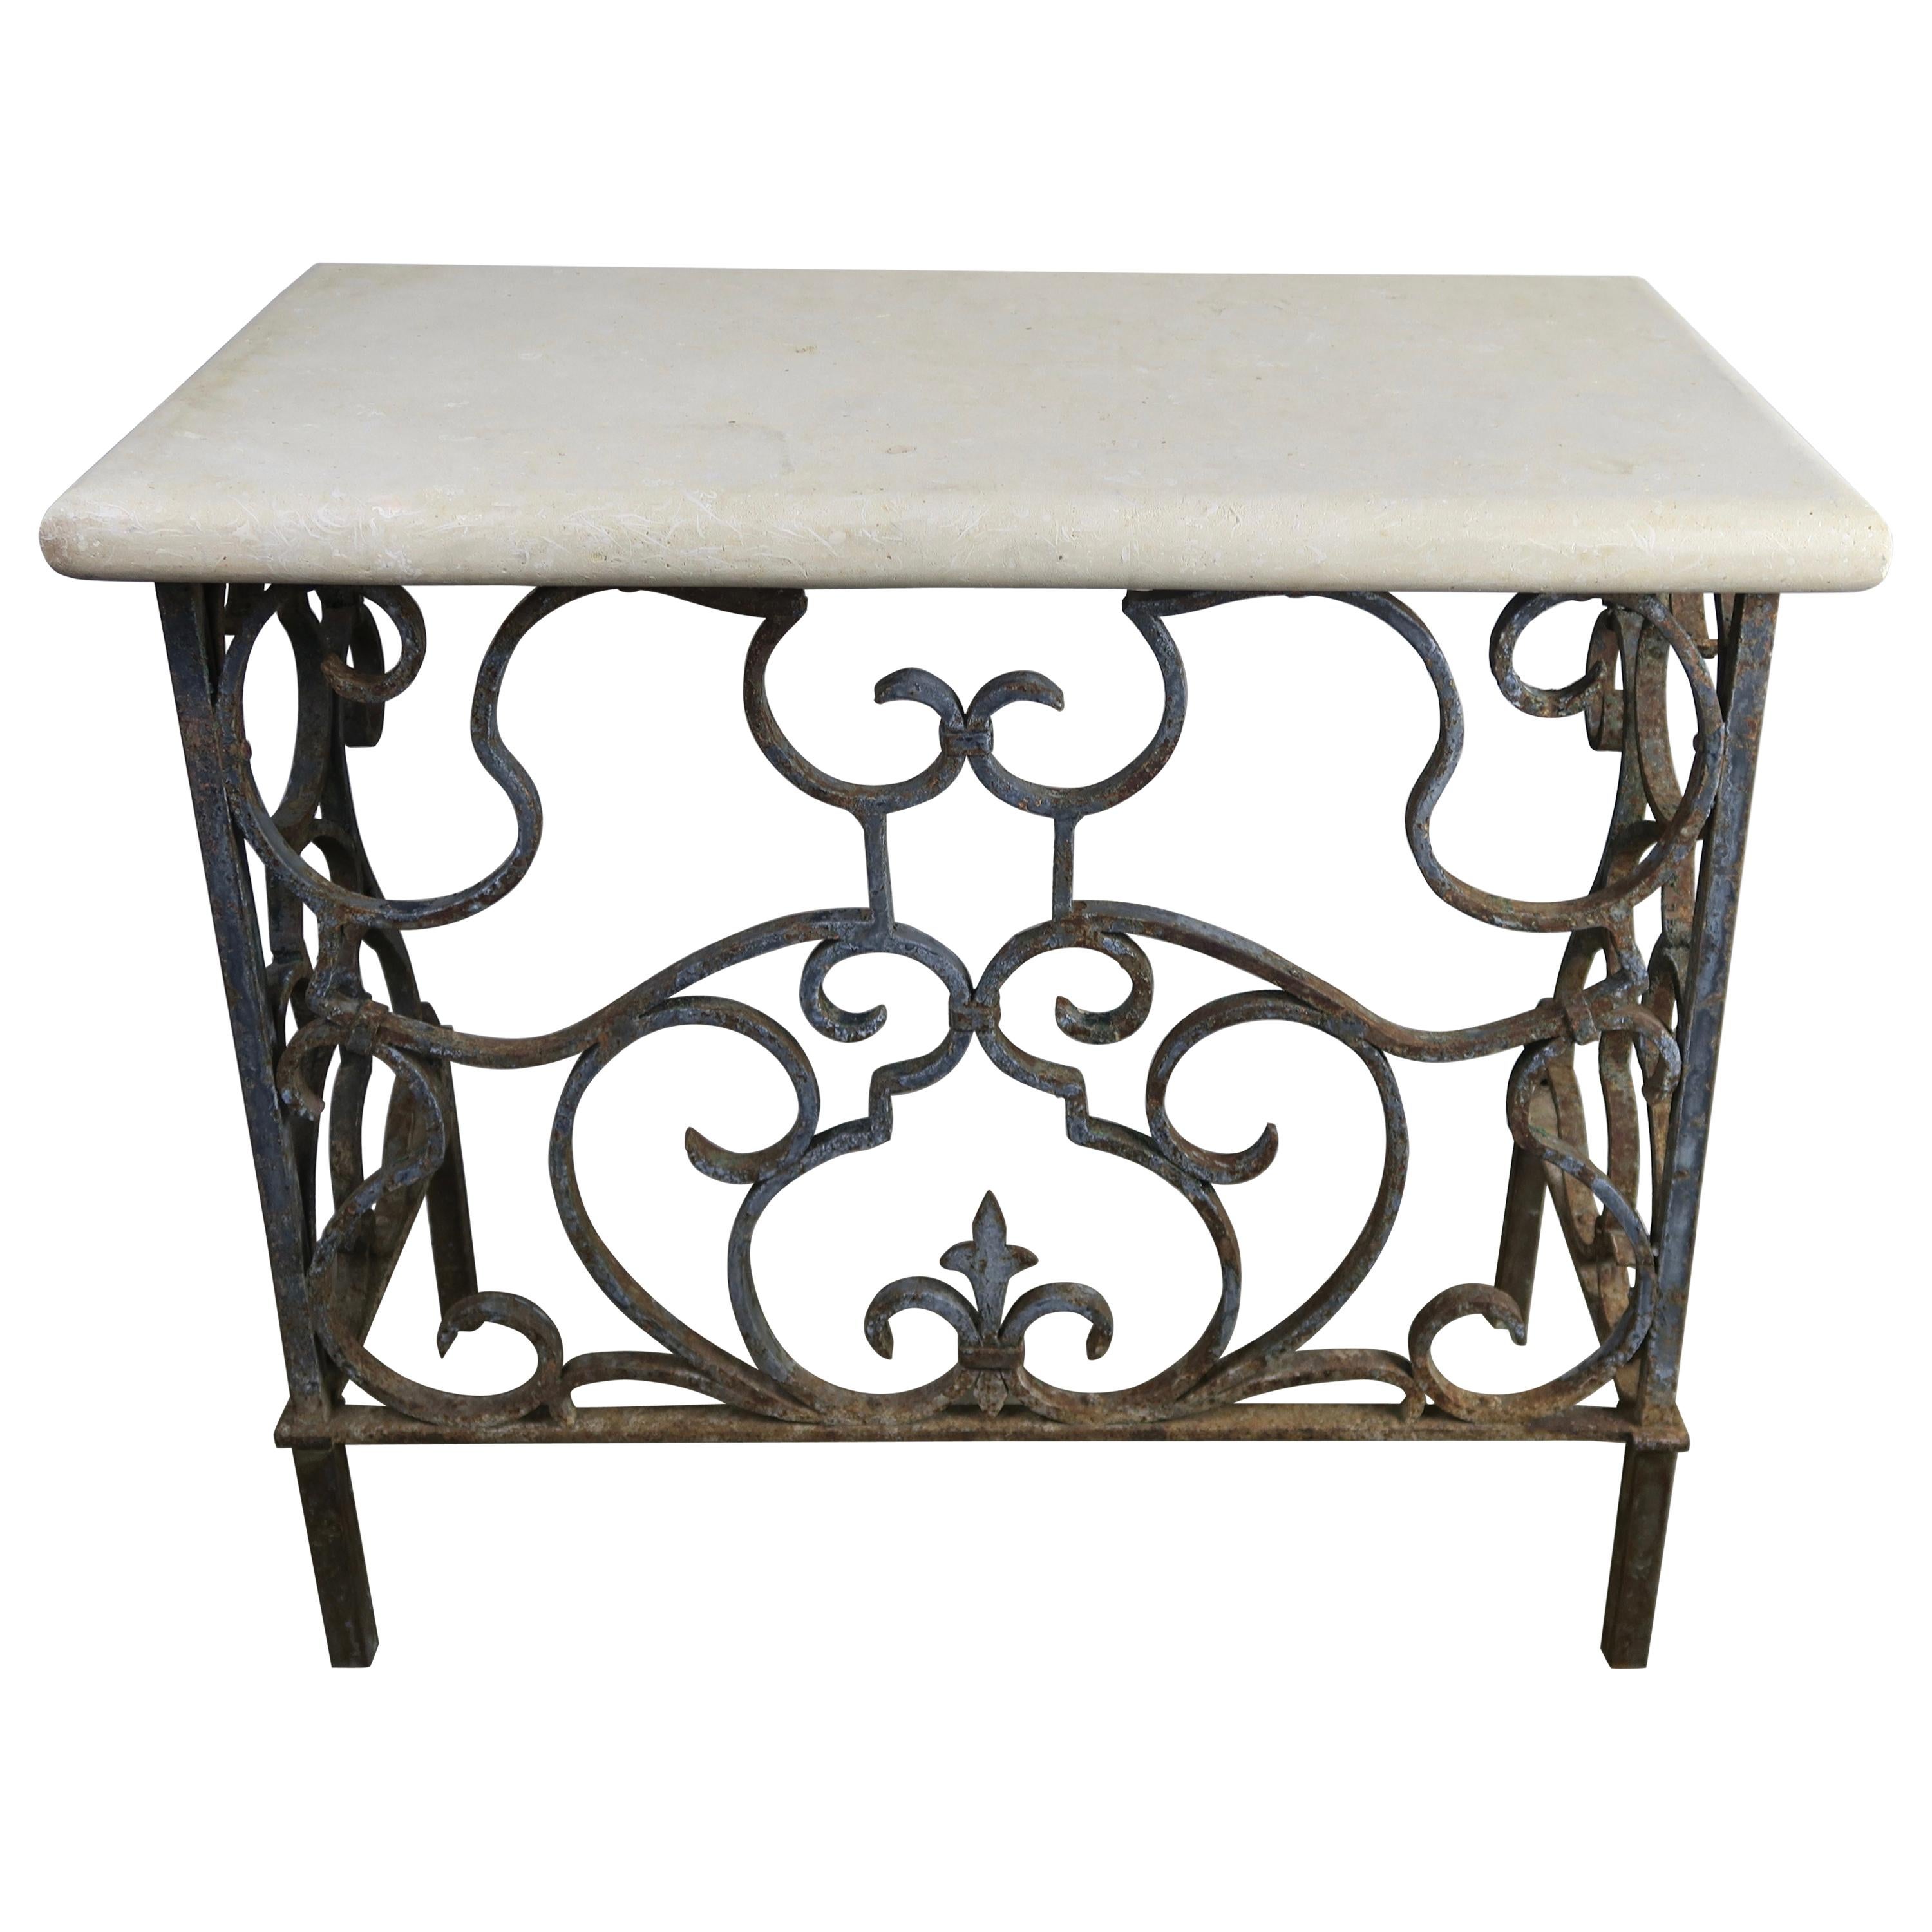 19th Century Wrought Iron Console with Travertine Top